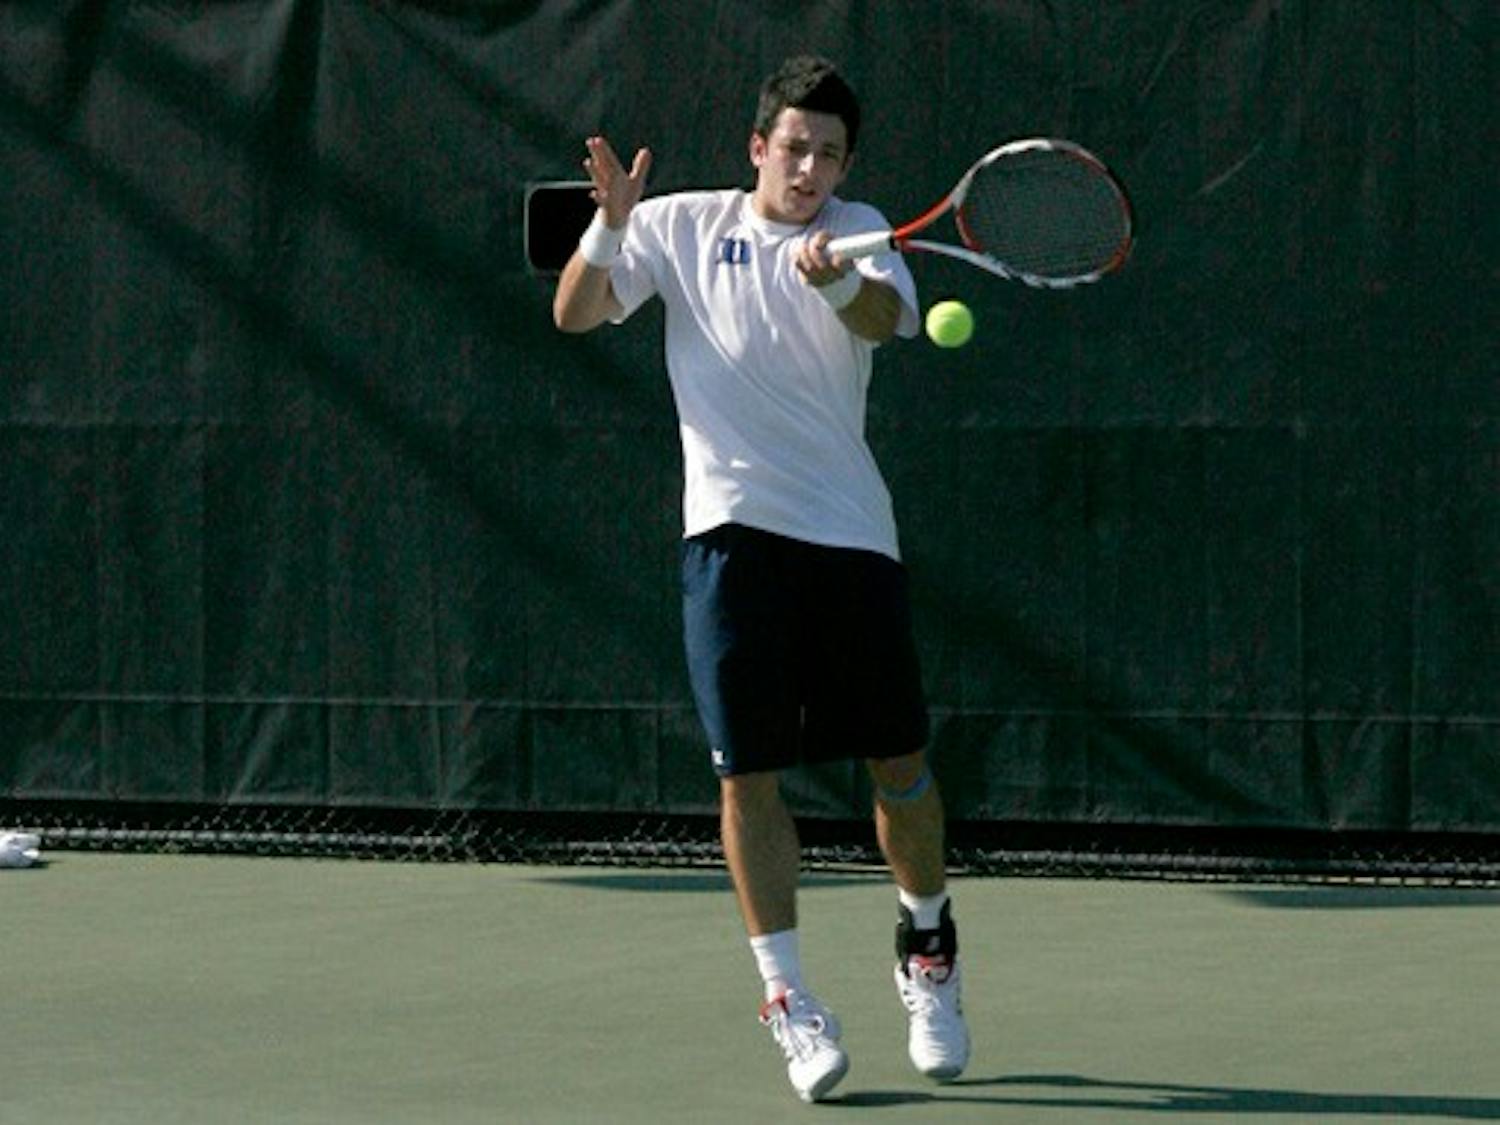 Henrique Cunha will be the favorite in his match at No. 1 singles against North Carolina.